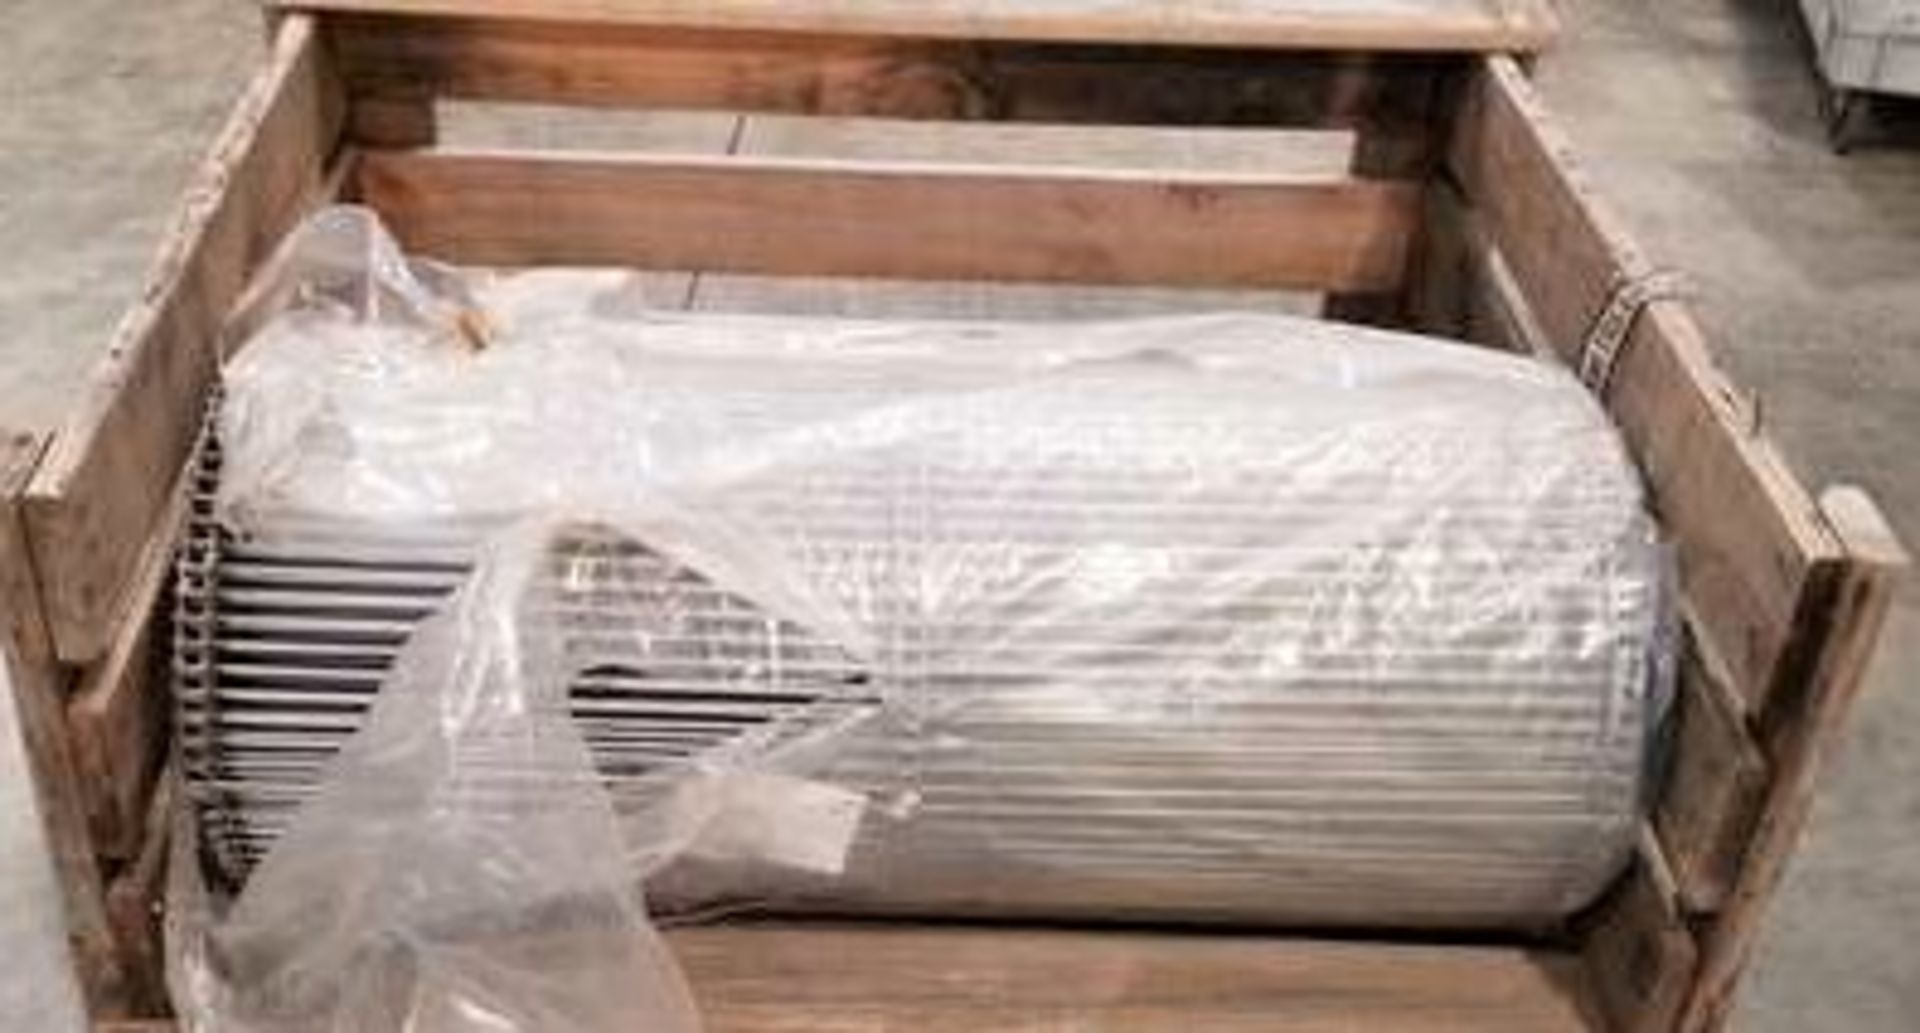 Lot of new S/S Belting. ~ 65' of new 44" Wide (41" usable) Cambridge Wire belt S/S conveyor. Rods